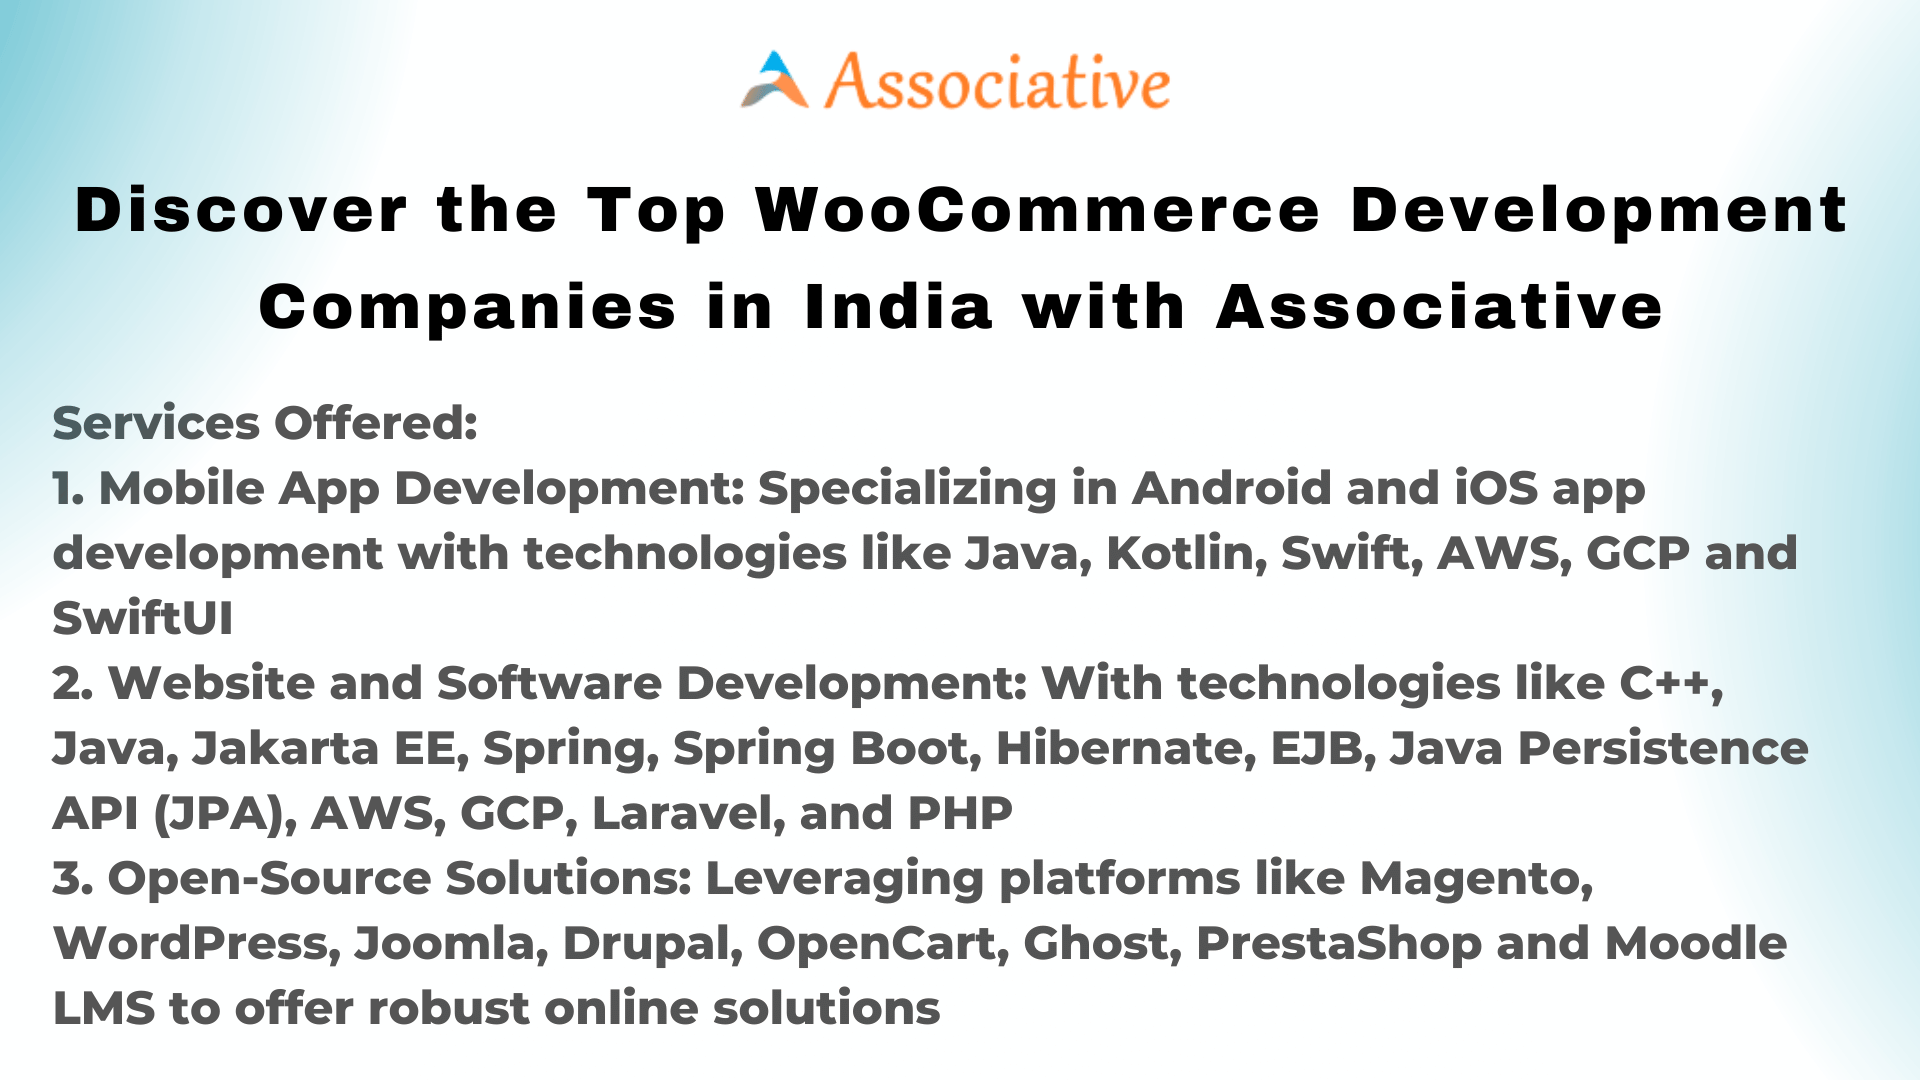 Discover the Top WooCommerce Development Companies in India with Associative